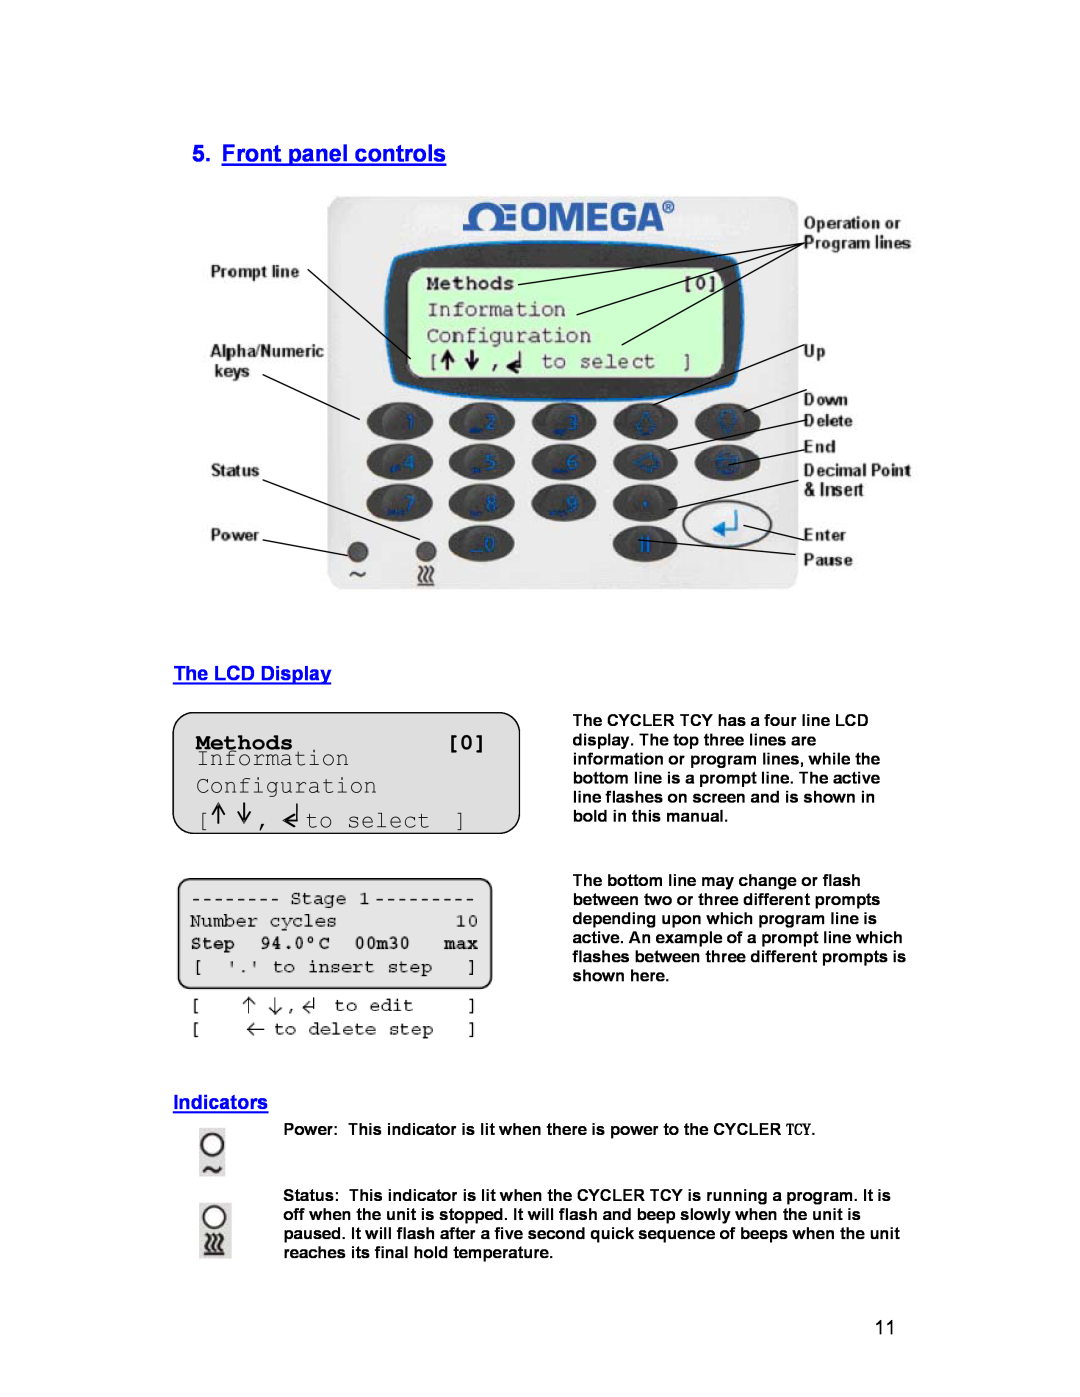 Omega Engineering 25, 48 Front panel controls, Programs, Methods, Information, Configuration, to select, The LCD Display 